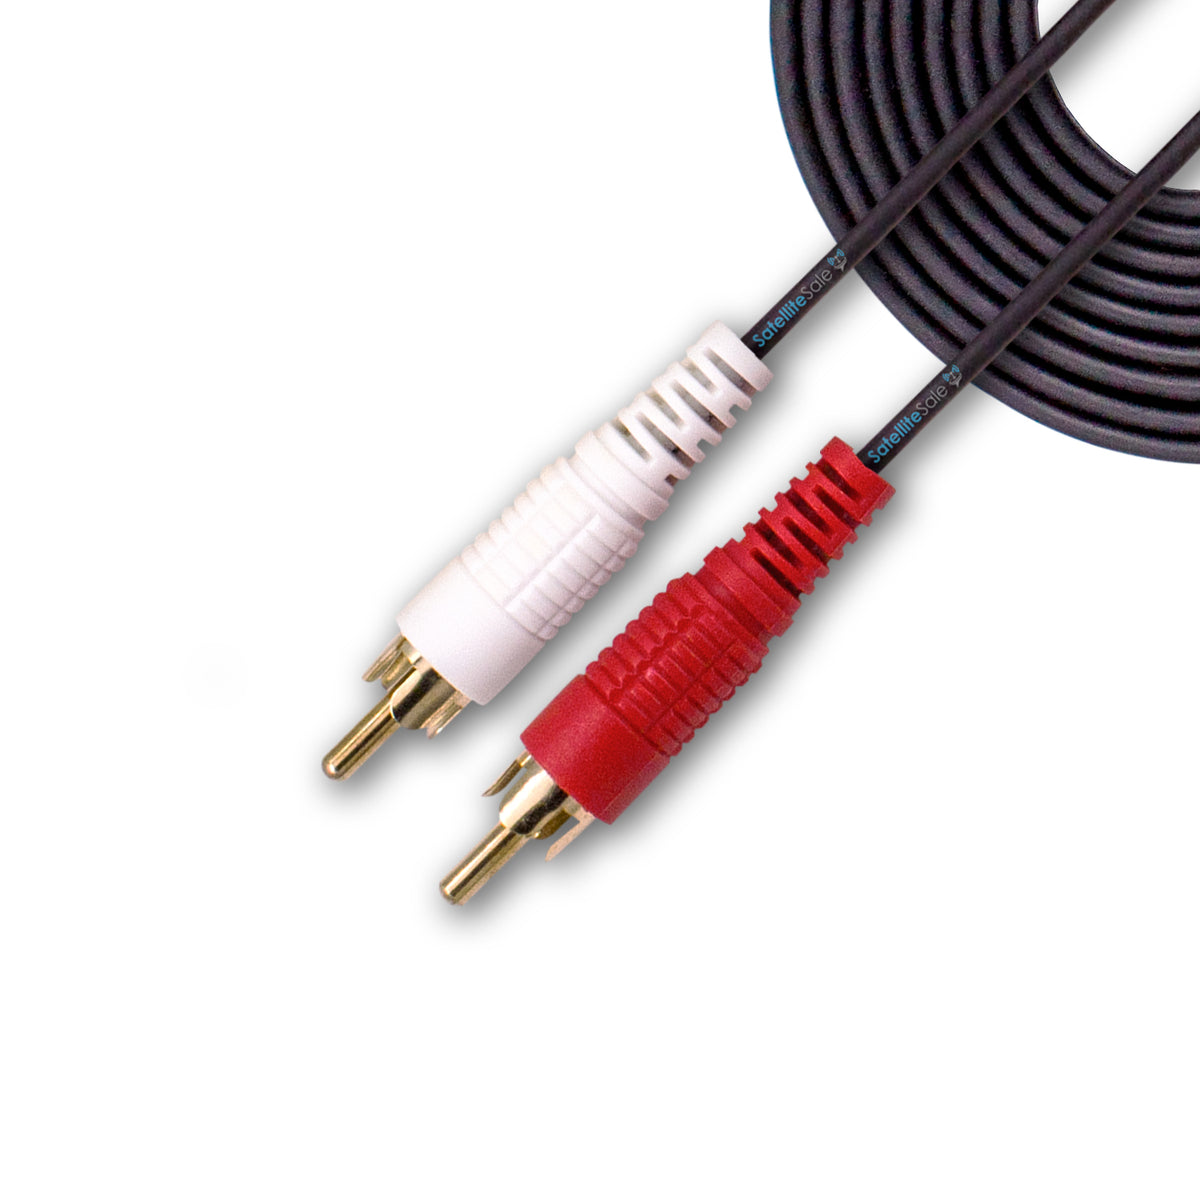 RCA Composite Video Subwoofer S/PDIF Cable – Coax 3Feet